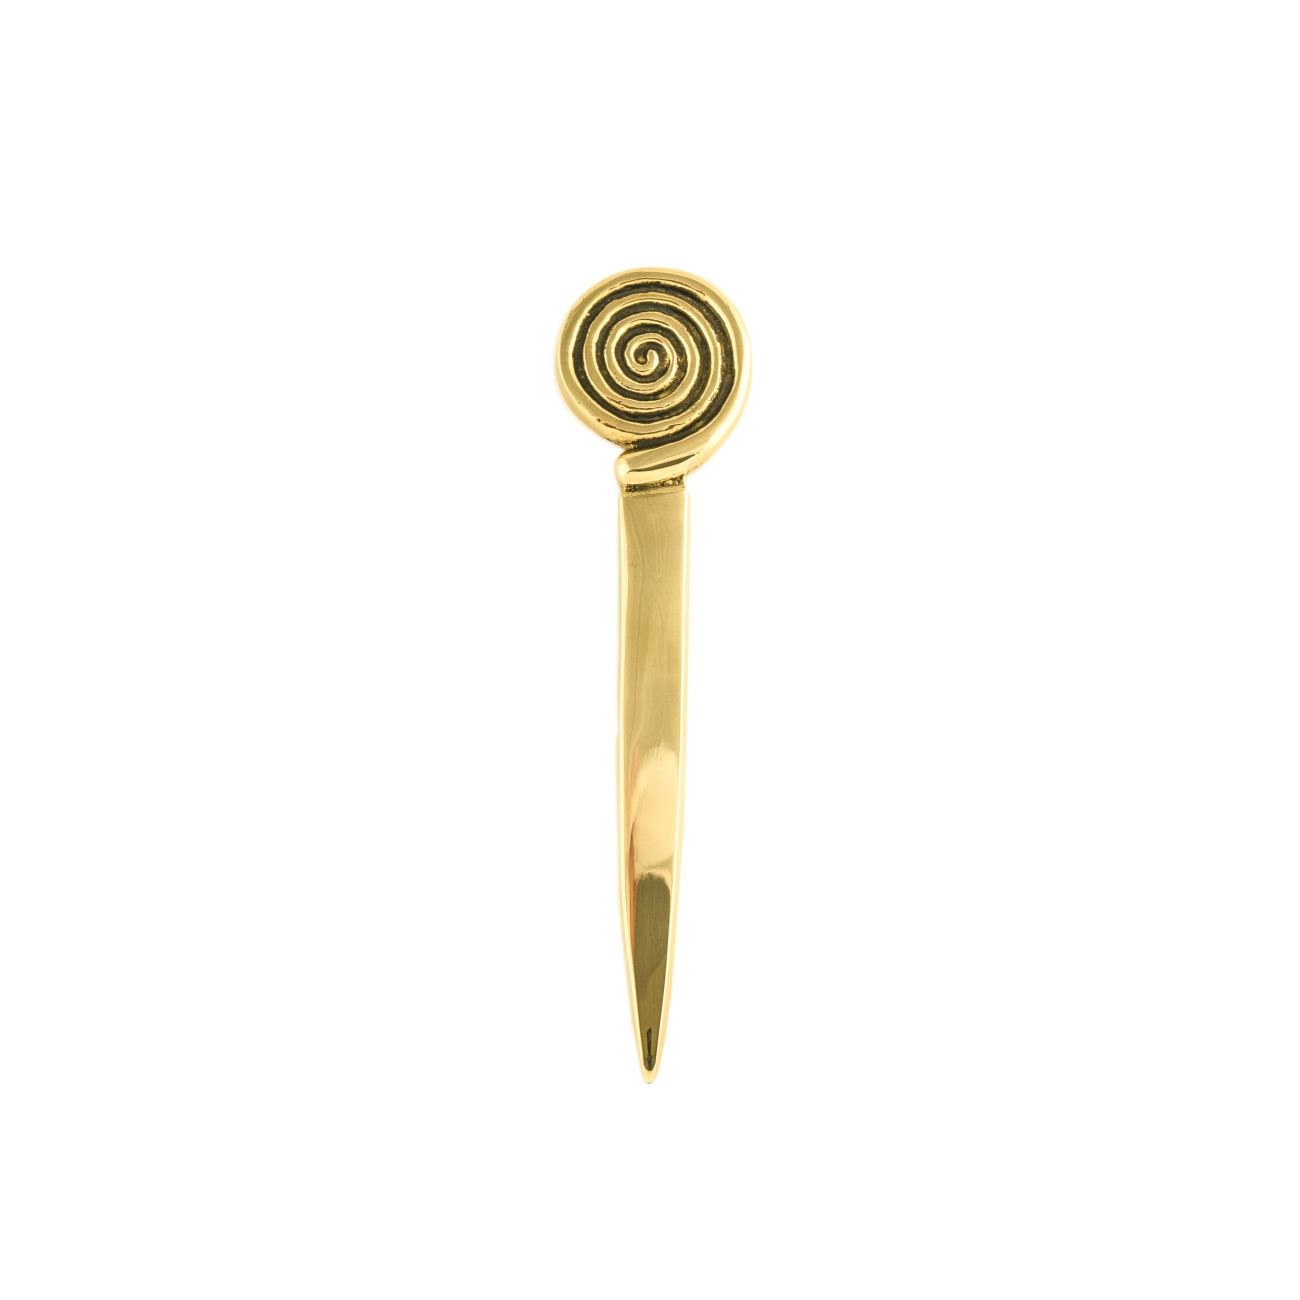 Personalized Letter Opener - Spiral Scroll